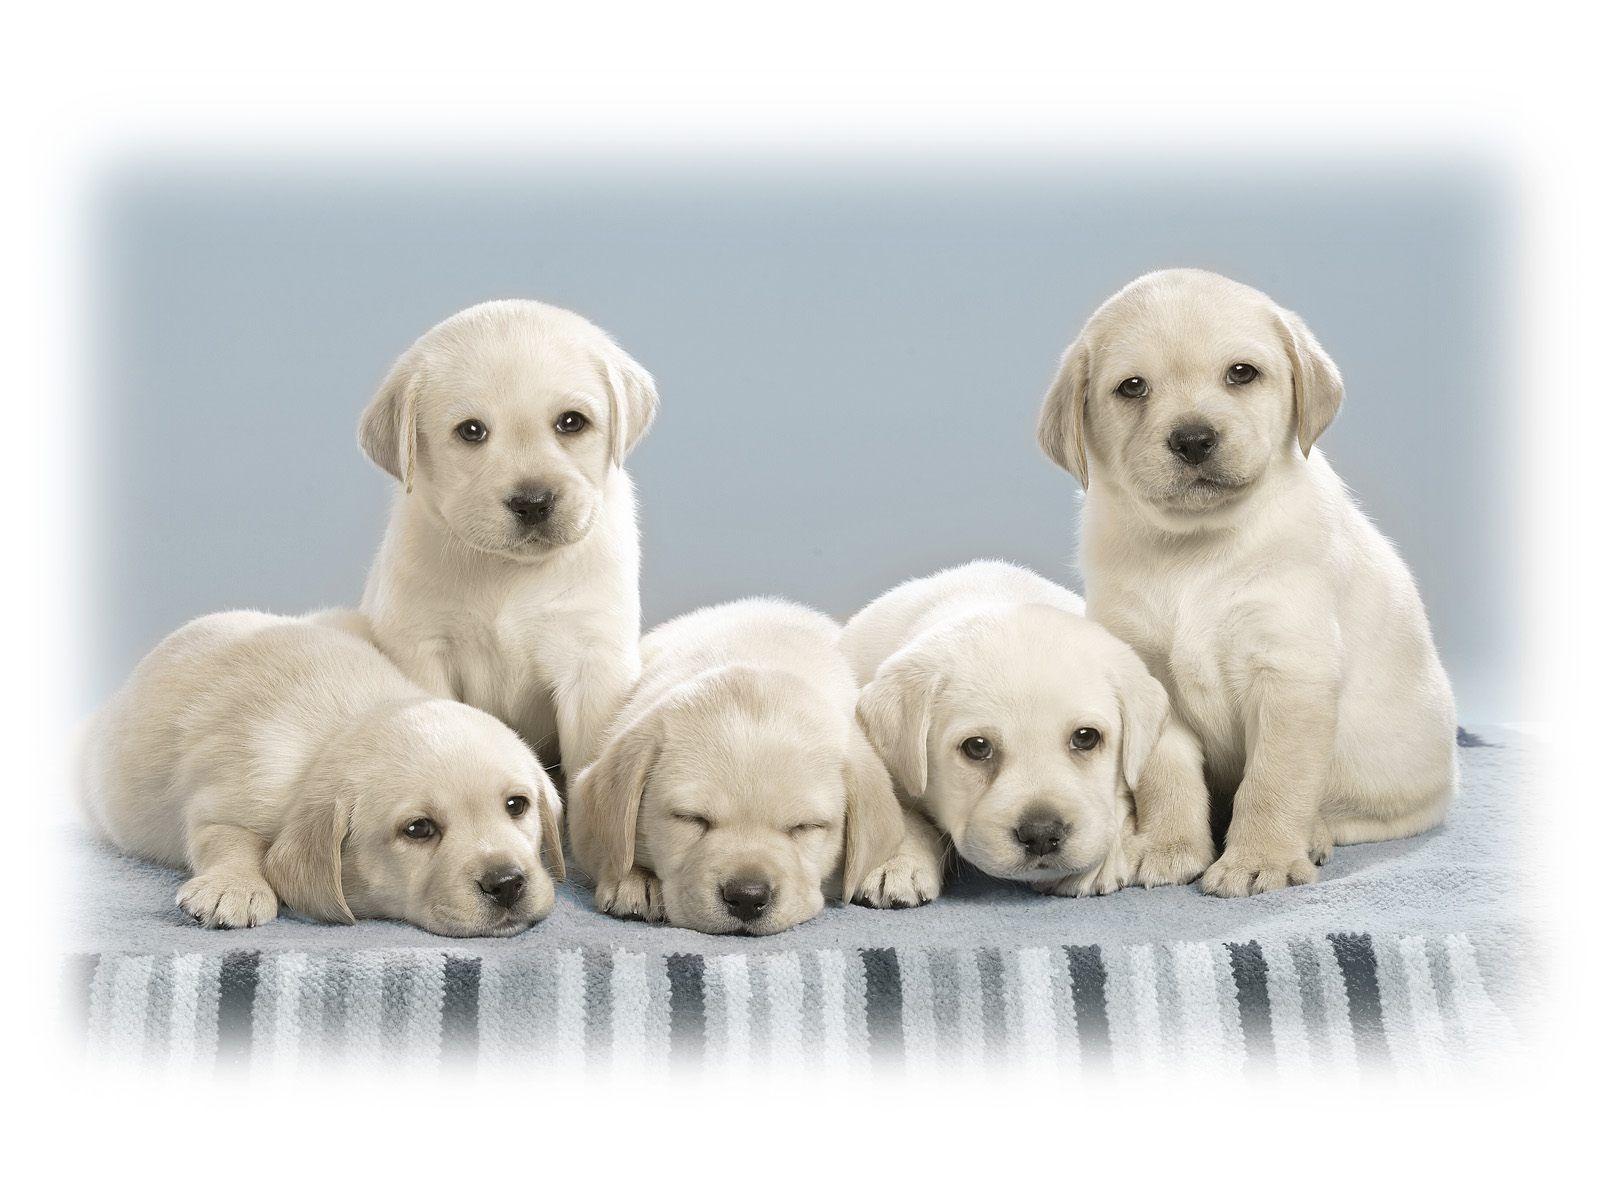 Puppy Backgrounds For Computer 135959 High Definition Wallpapers